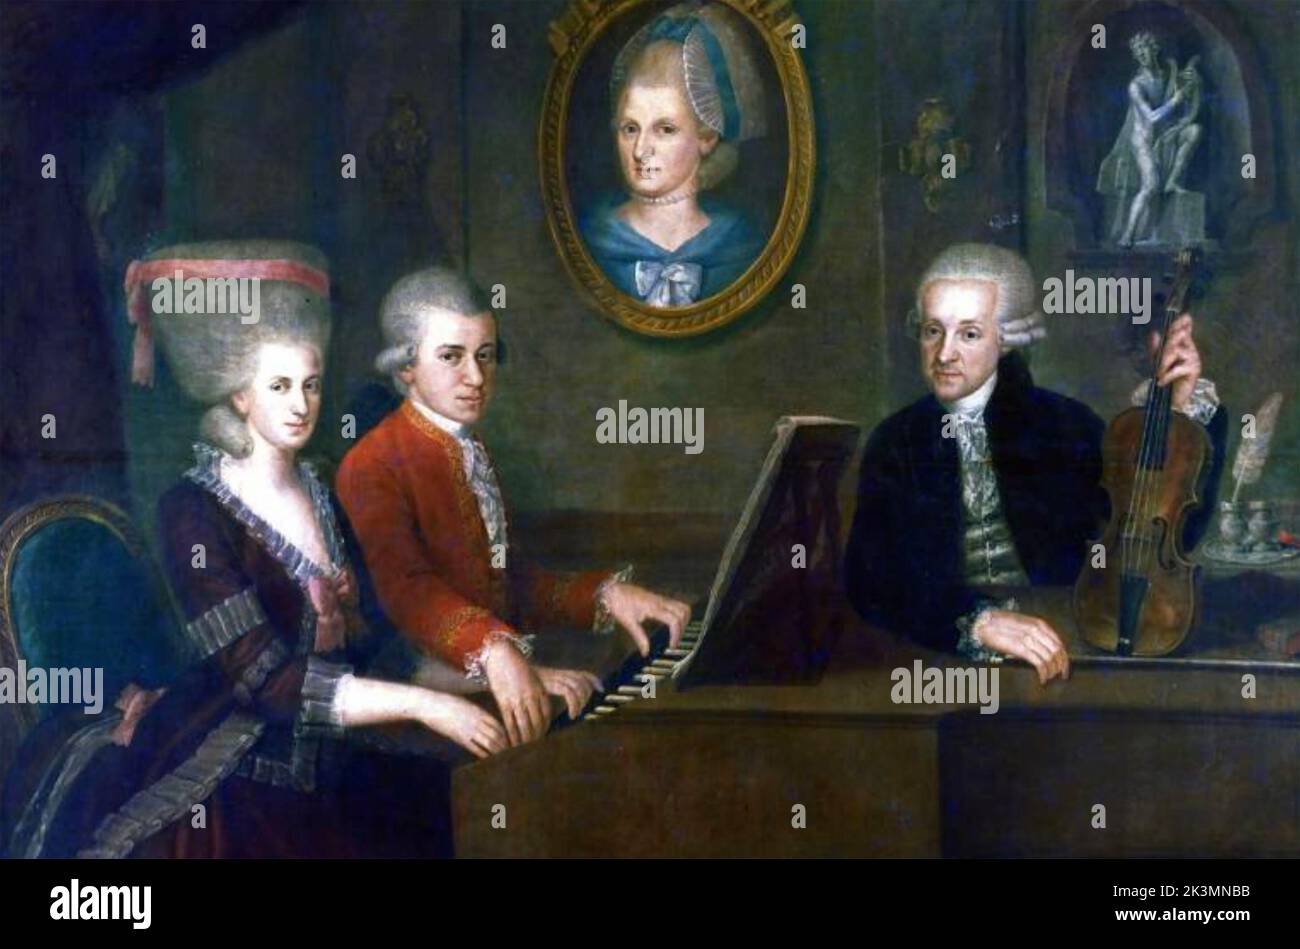 WOLFGANG AMADEUS MOZART (1756-1791)  Austrian composer with his sister Maria Anna and father Leopold in 1780. The portrait on the wall is his mother Anna Maria who had died in 1778. Stock Photo